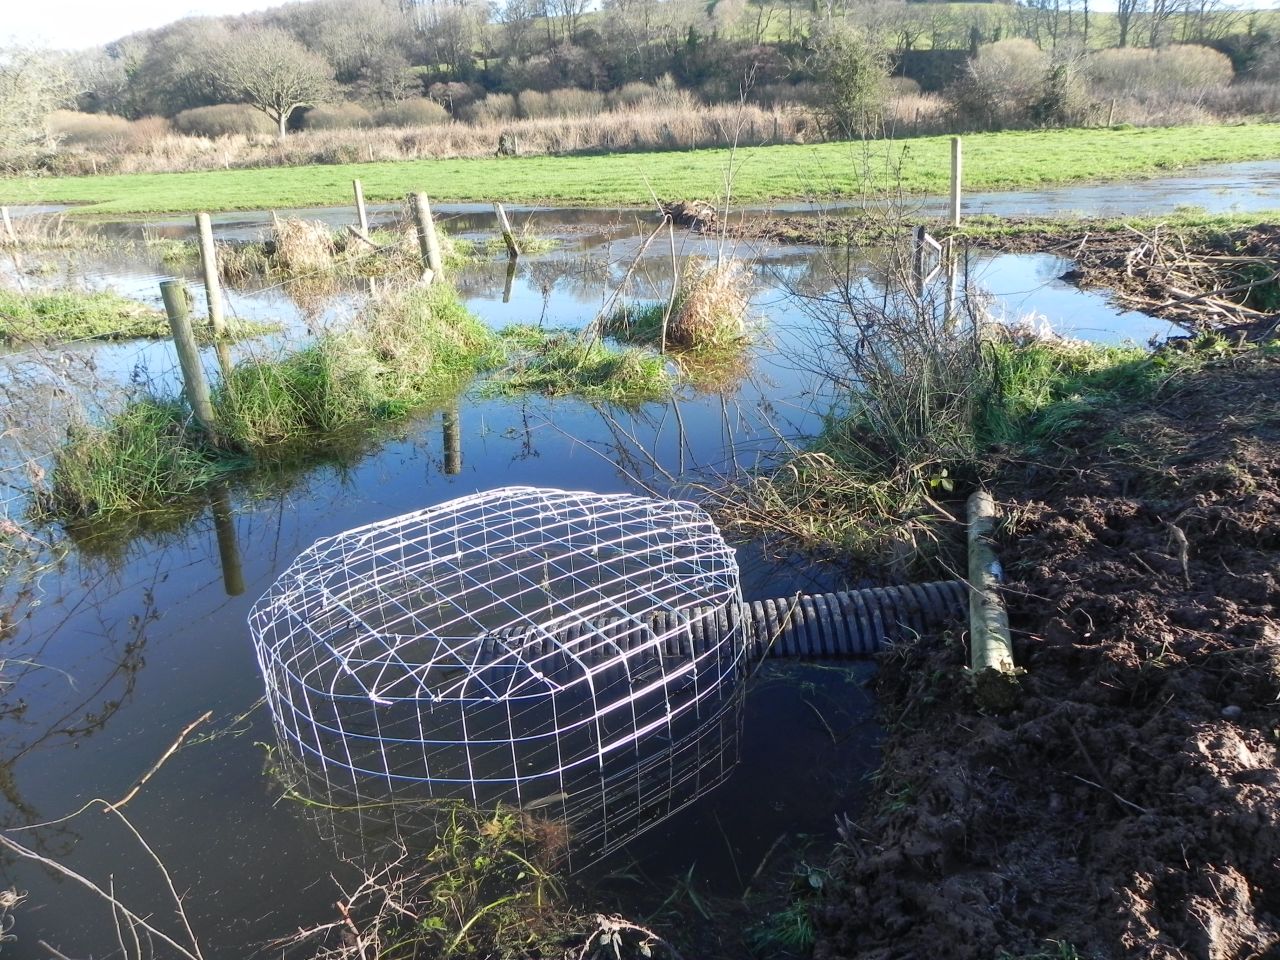 A large part of DWT's job is to manage the relationship between beavers and landowners. Here they have installed a pipe, or "beaver deceiver," to drain flooded farmland while allowing the beaver to keeps its dam.  